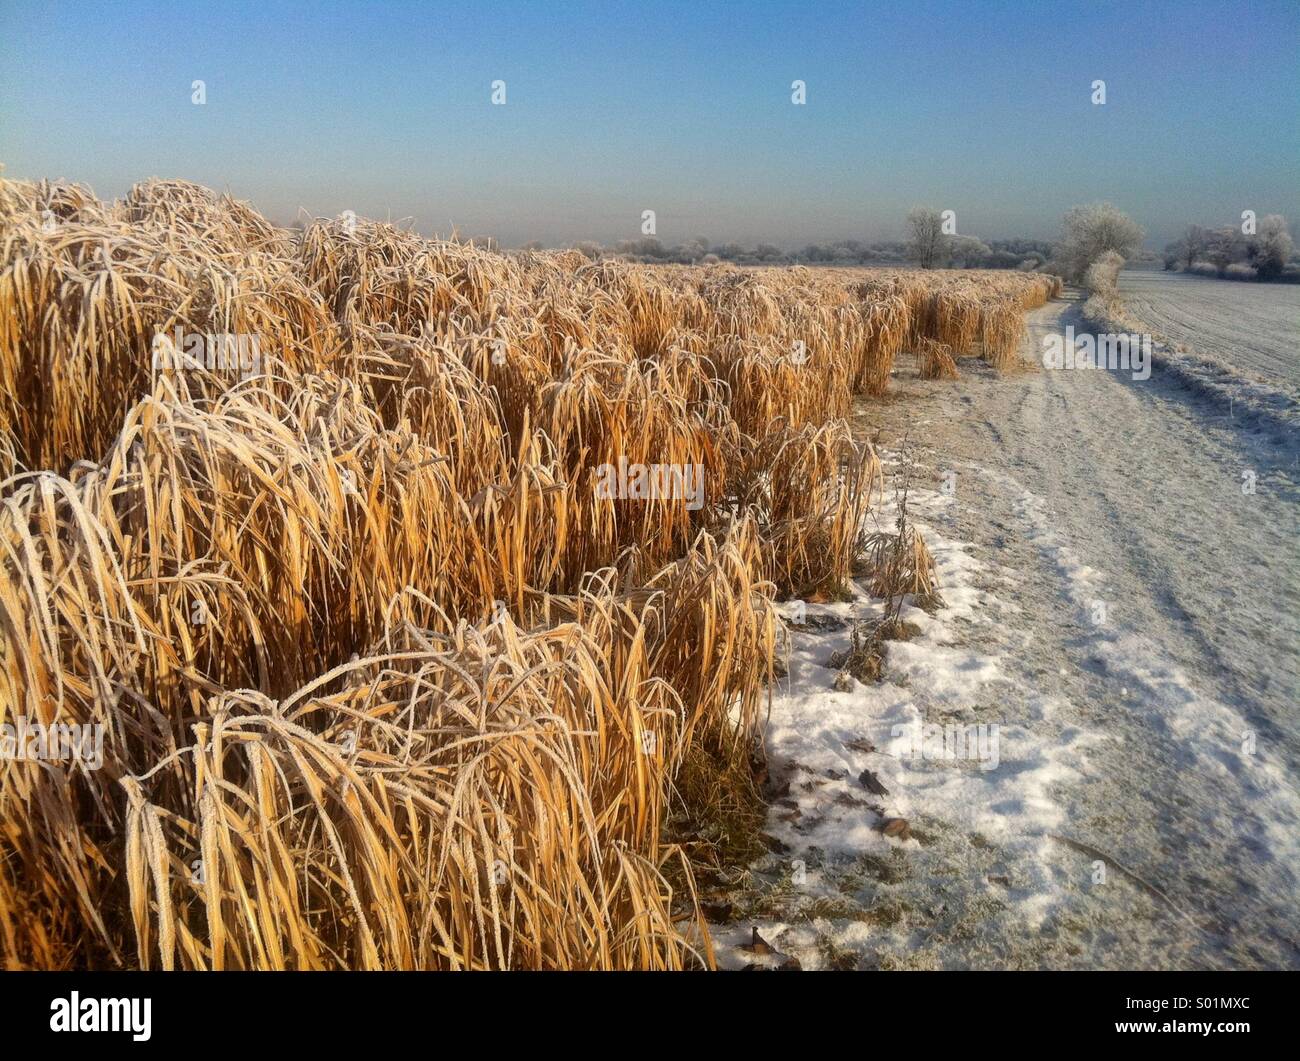 A crop of miscanthus grass in a field in Yorkshire, UK used for electricity generation. Stock Photo